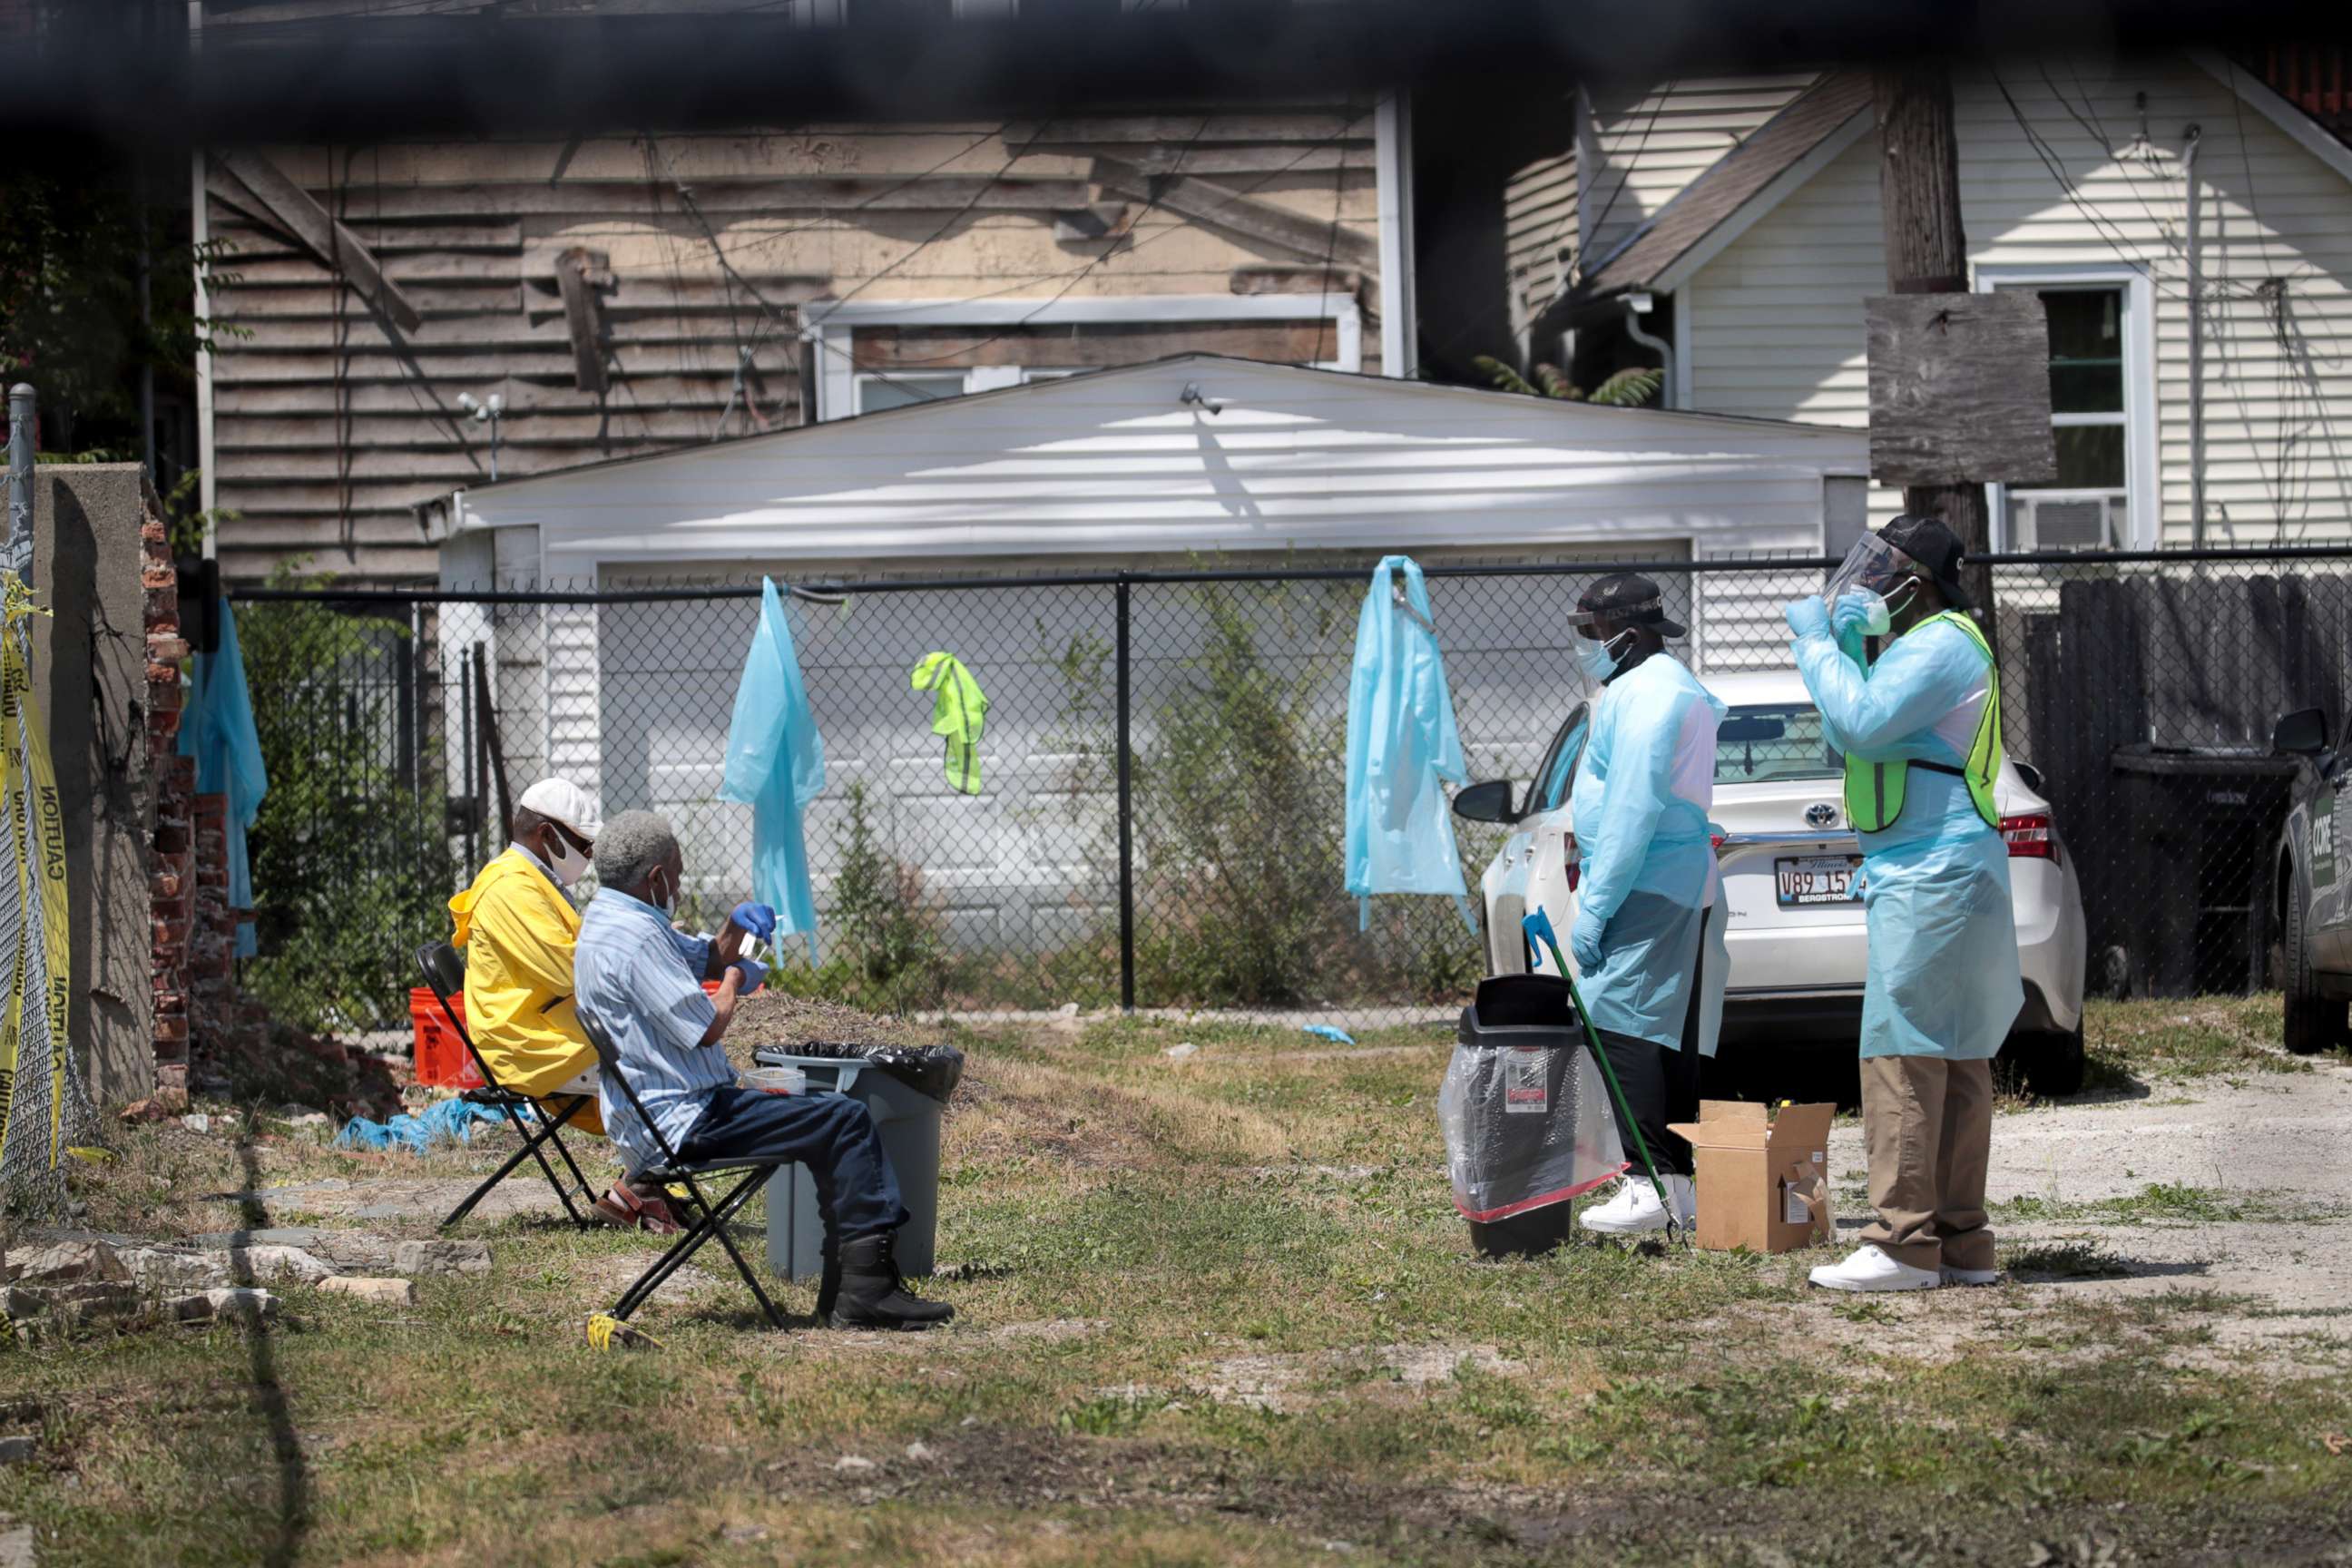 PHOTO: Workers talk residents through a COVID-19 self-test at a mobile COVID-19 testing site set up on a vacant lot in the Austin neighborhood on June 23, 2020 in Chicago.